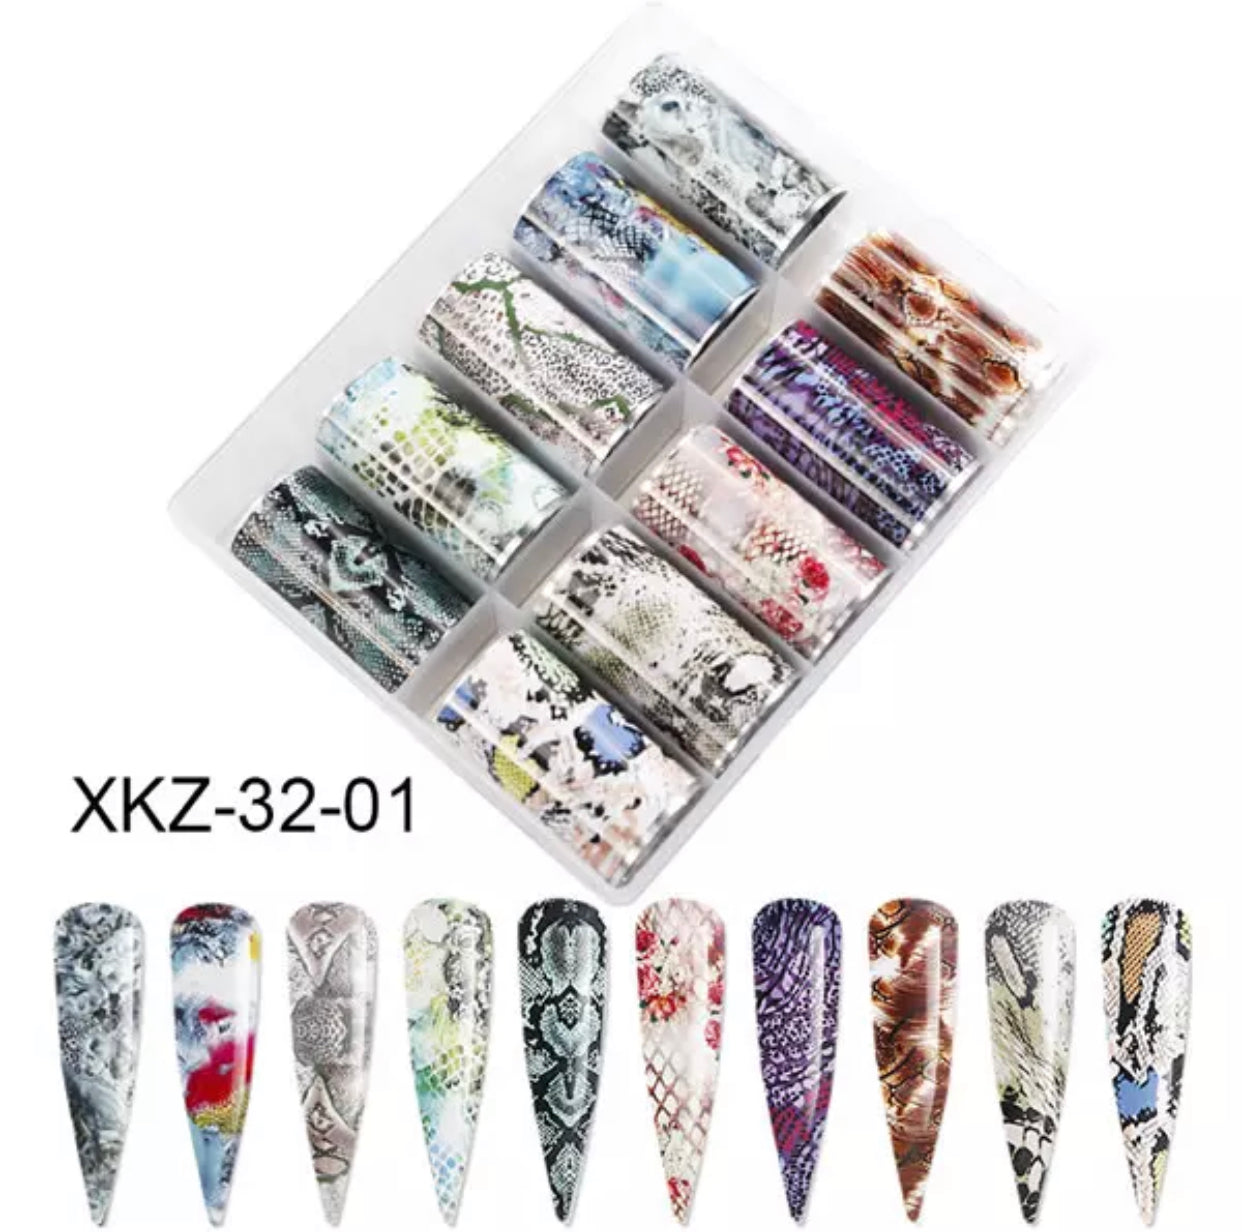 Beautiful Snake Skins With 12 different Design - XKZ 32-01 - Premier Nail Supply 